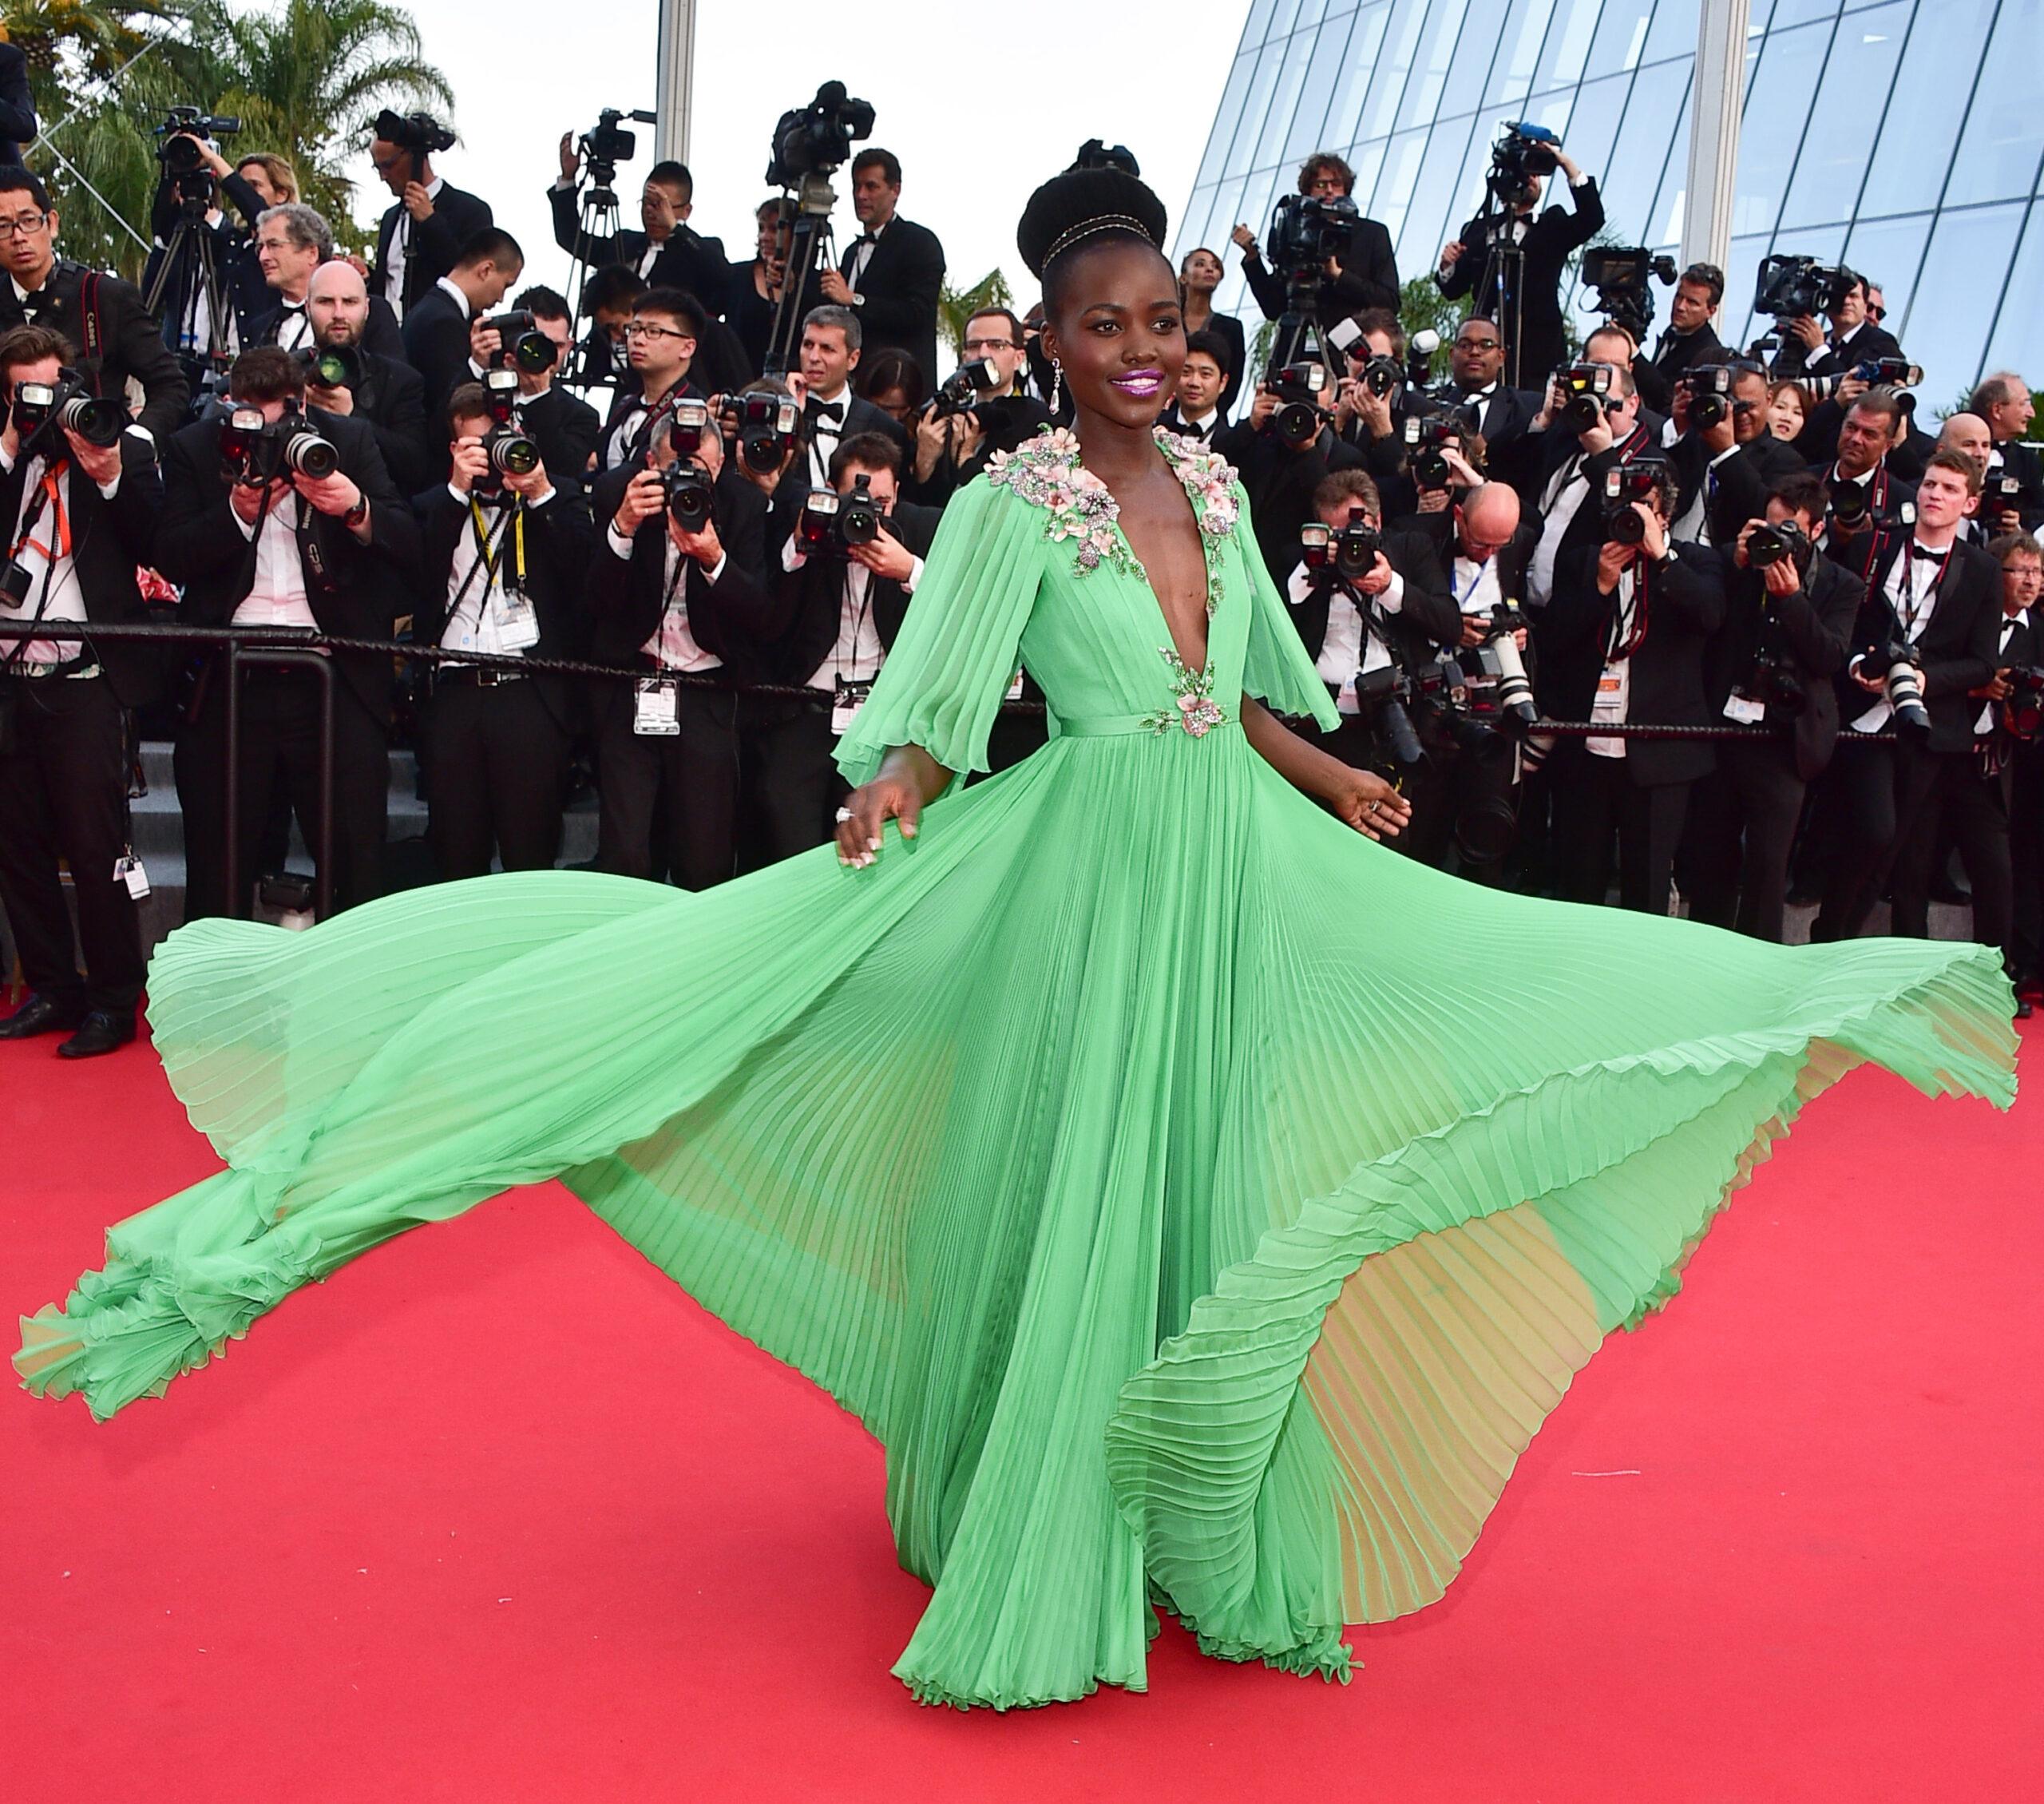 Lupita Nyong'o in a Gucci dress on the red carpet, Photographed by George Pimentel.